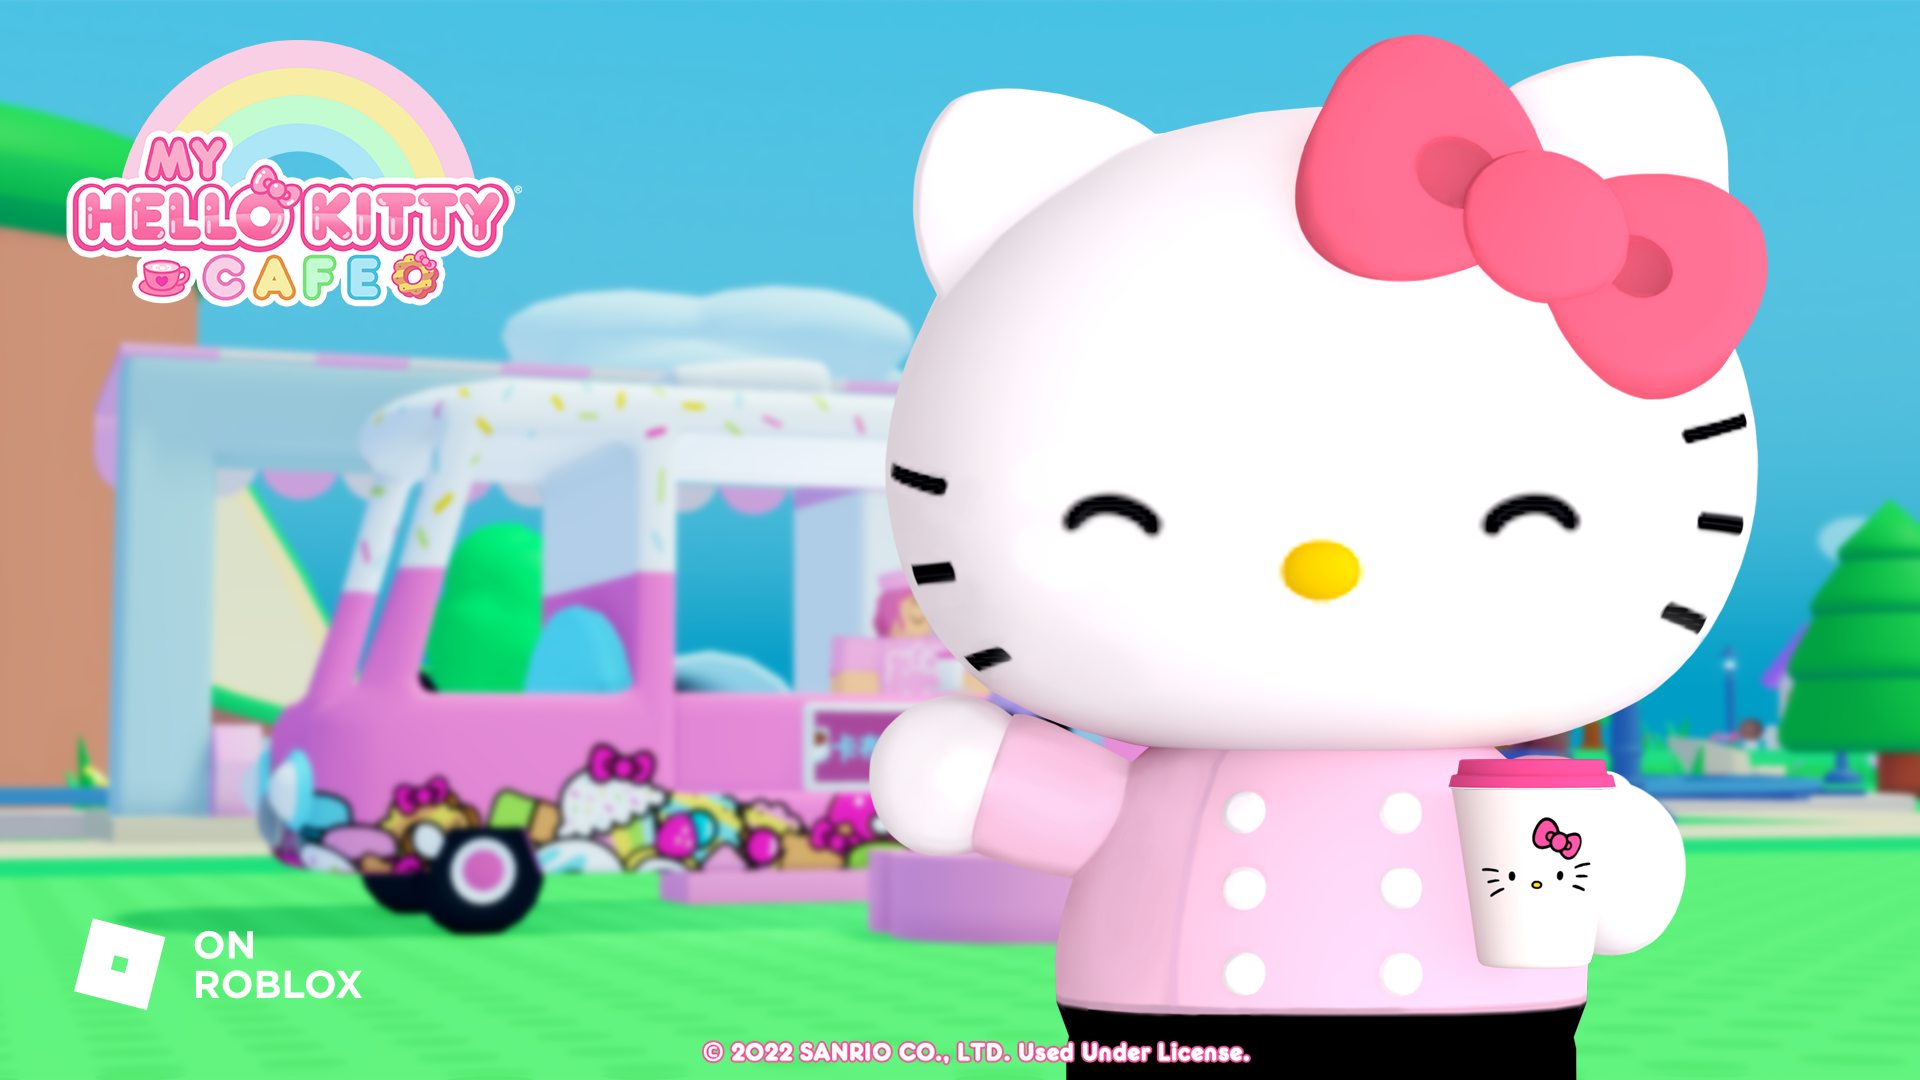 ˏˋ Lorielle ˎˊ˗ on X: 💞NEW Hello Kitty fit available @ 'sanatorium  🕯️🕯️🕯️ - - - - - - - !! LINKS BELOW !! recolours coming soon! - - - - -  - - #Roblox #RobloxClothing #robloxclothingdesigner #RobloxDesigner  #robloxclothes #RTCdesigner